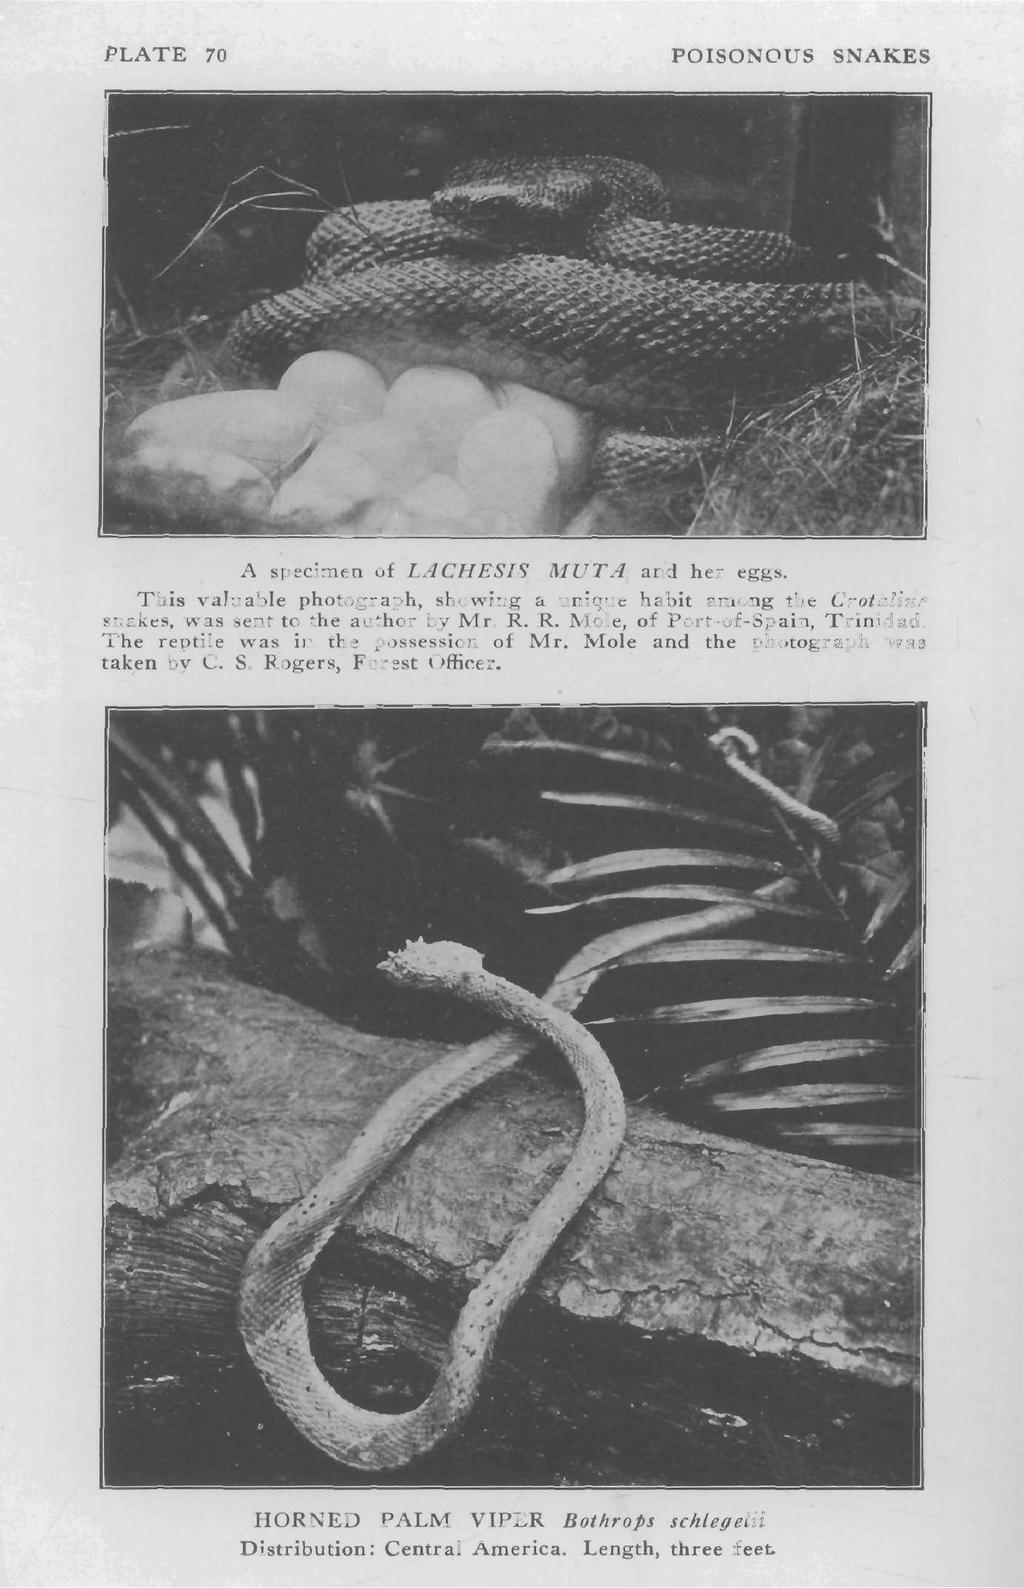 PLATE 70 POISONOUS SNAKES A specimen of LACHESIS MUTA and her eggs. This valuable photograph, showing a unique habit among the Crotalin/" snakes, was sent to the author by Mr. R.